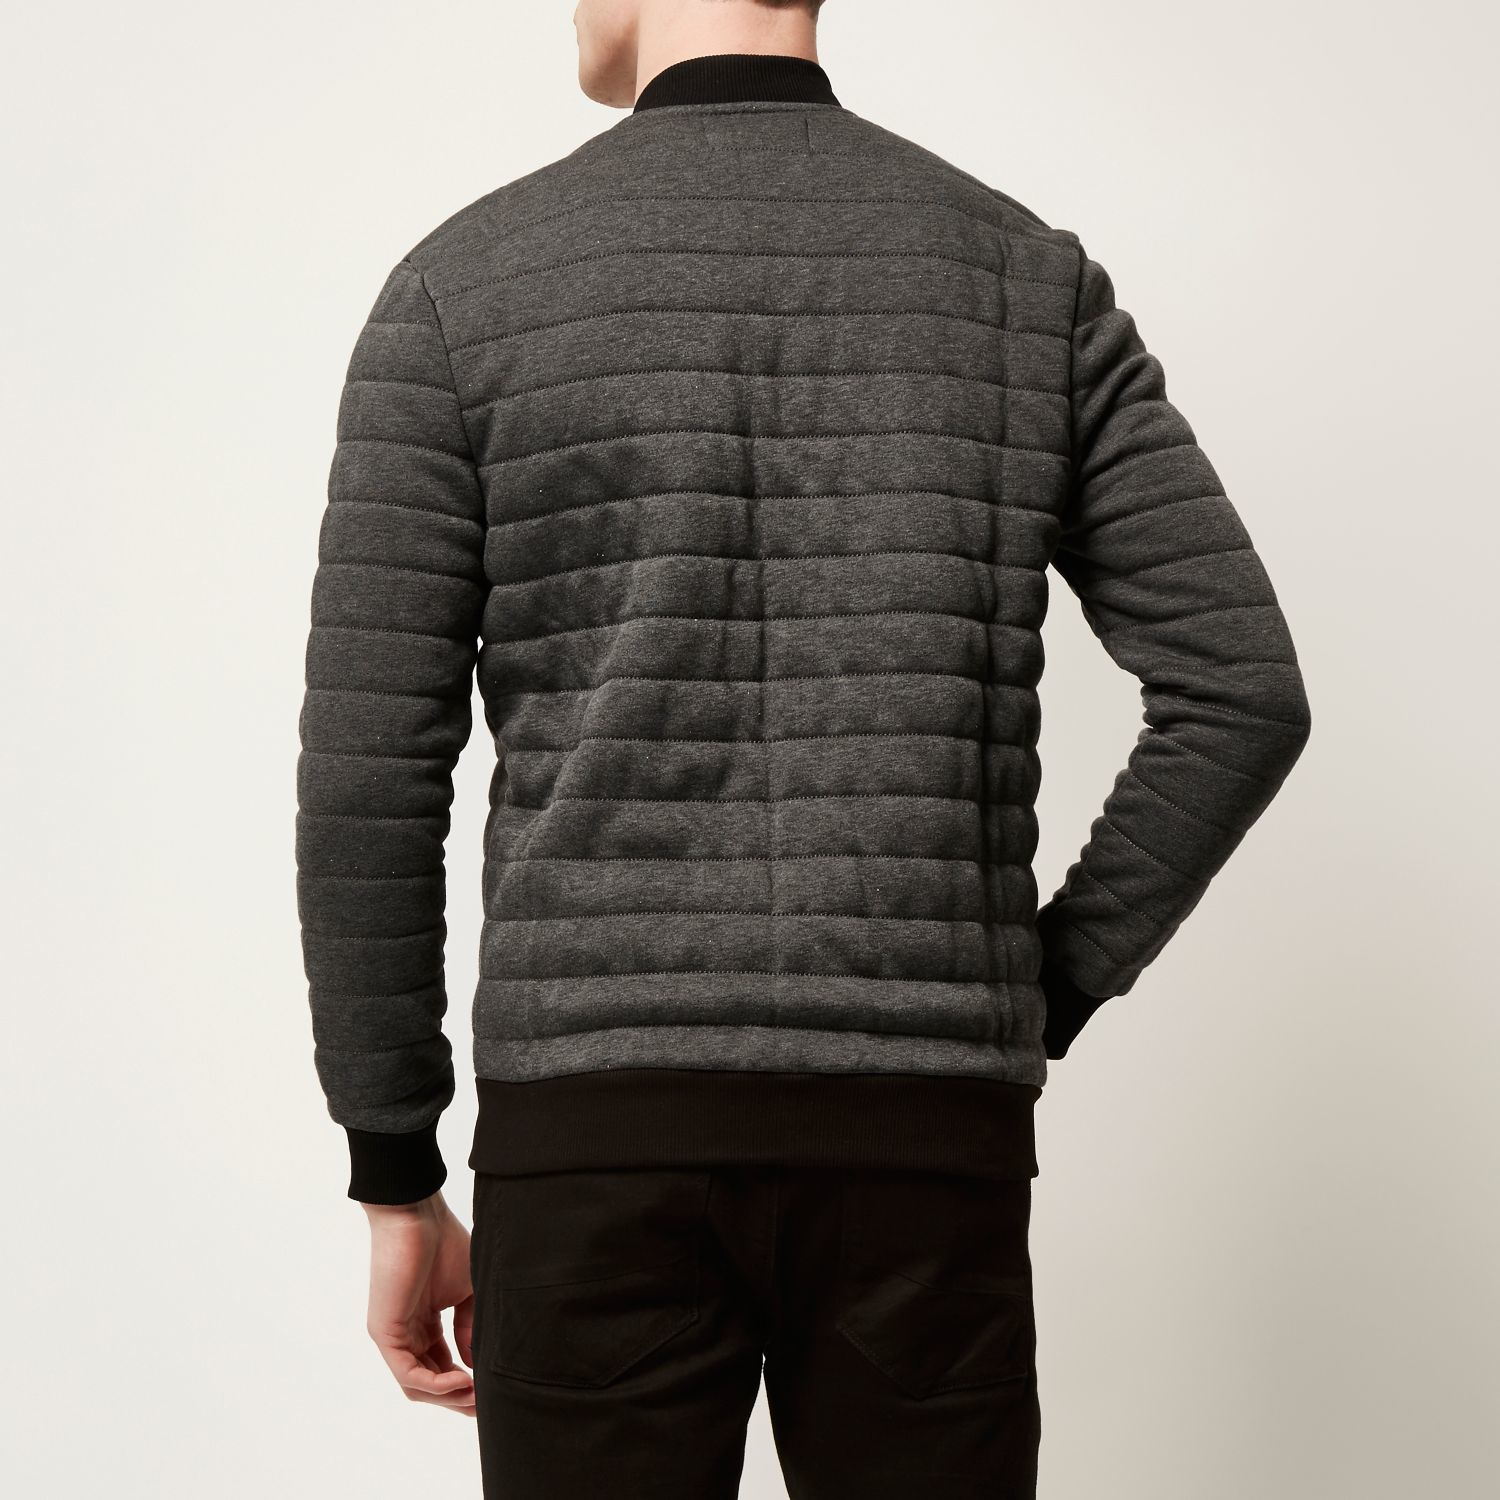 River Island Cotton Dark Grey Quilted Bomber Jacket in Gray for Men - Lyst